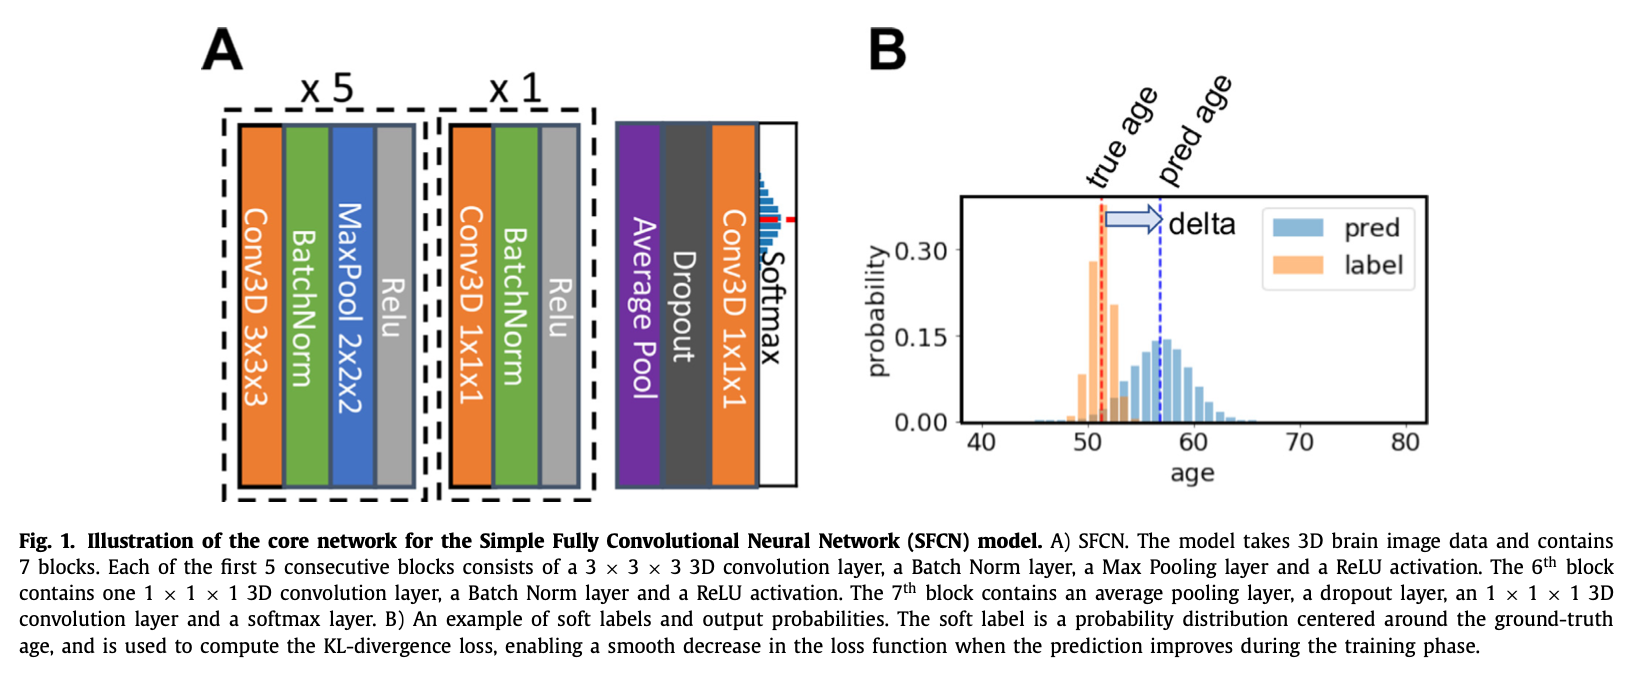 Fig. 1. Illustration of the core network for the Simple Fully Convolutional Neural Network (SFCN) model.